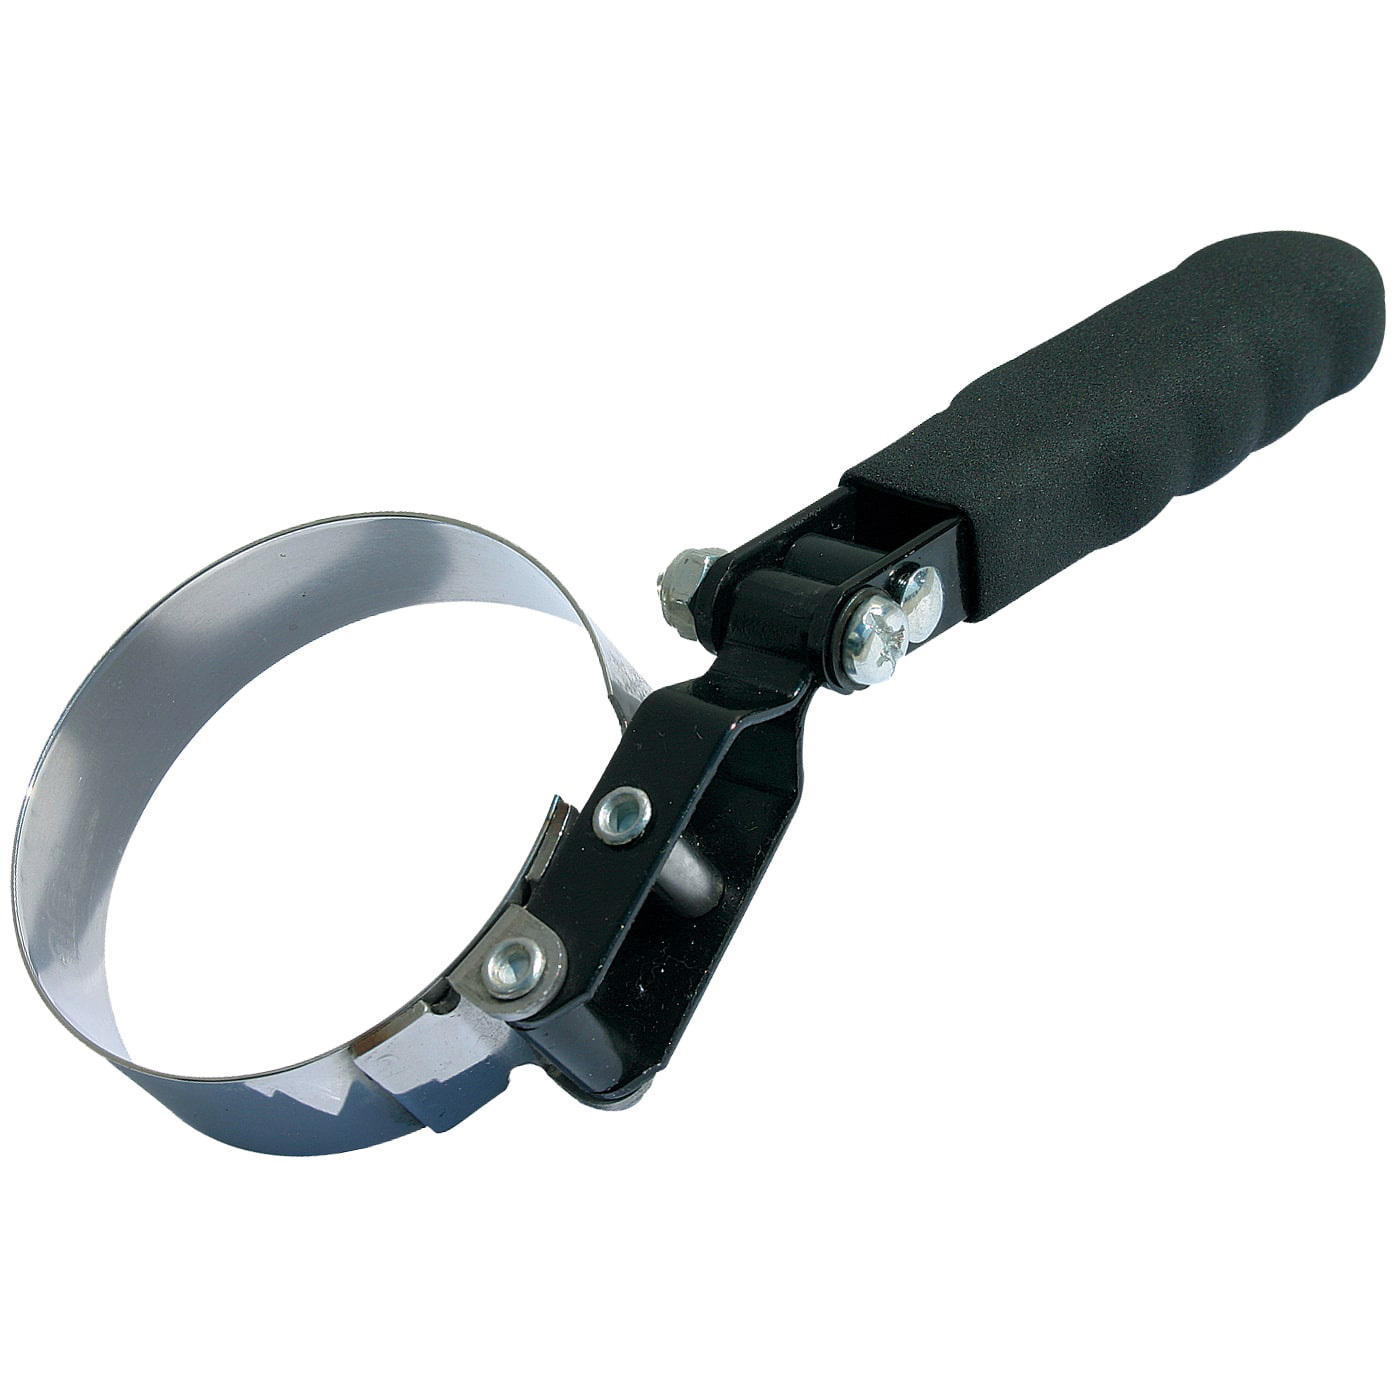 SP Tools 73-86mm Swivel Handle Oil Filter Wrench SP64004